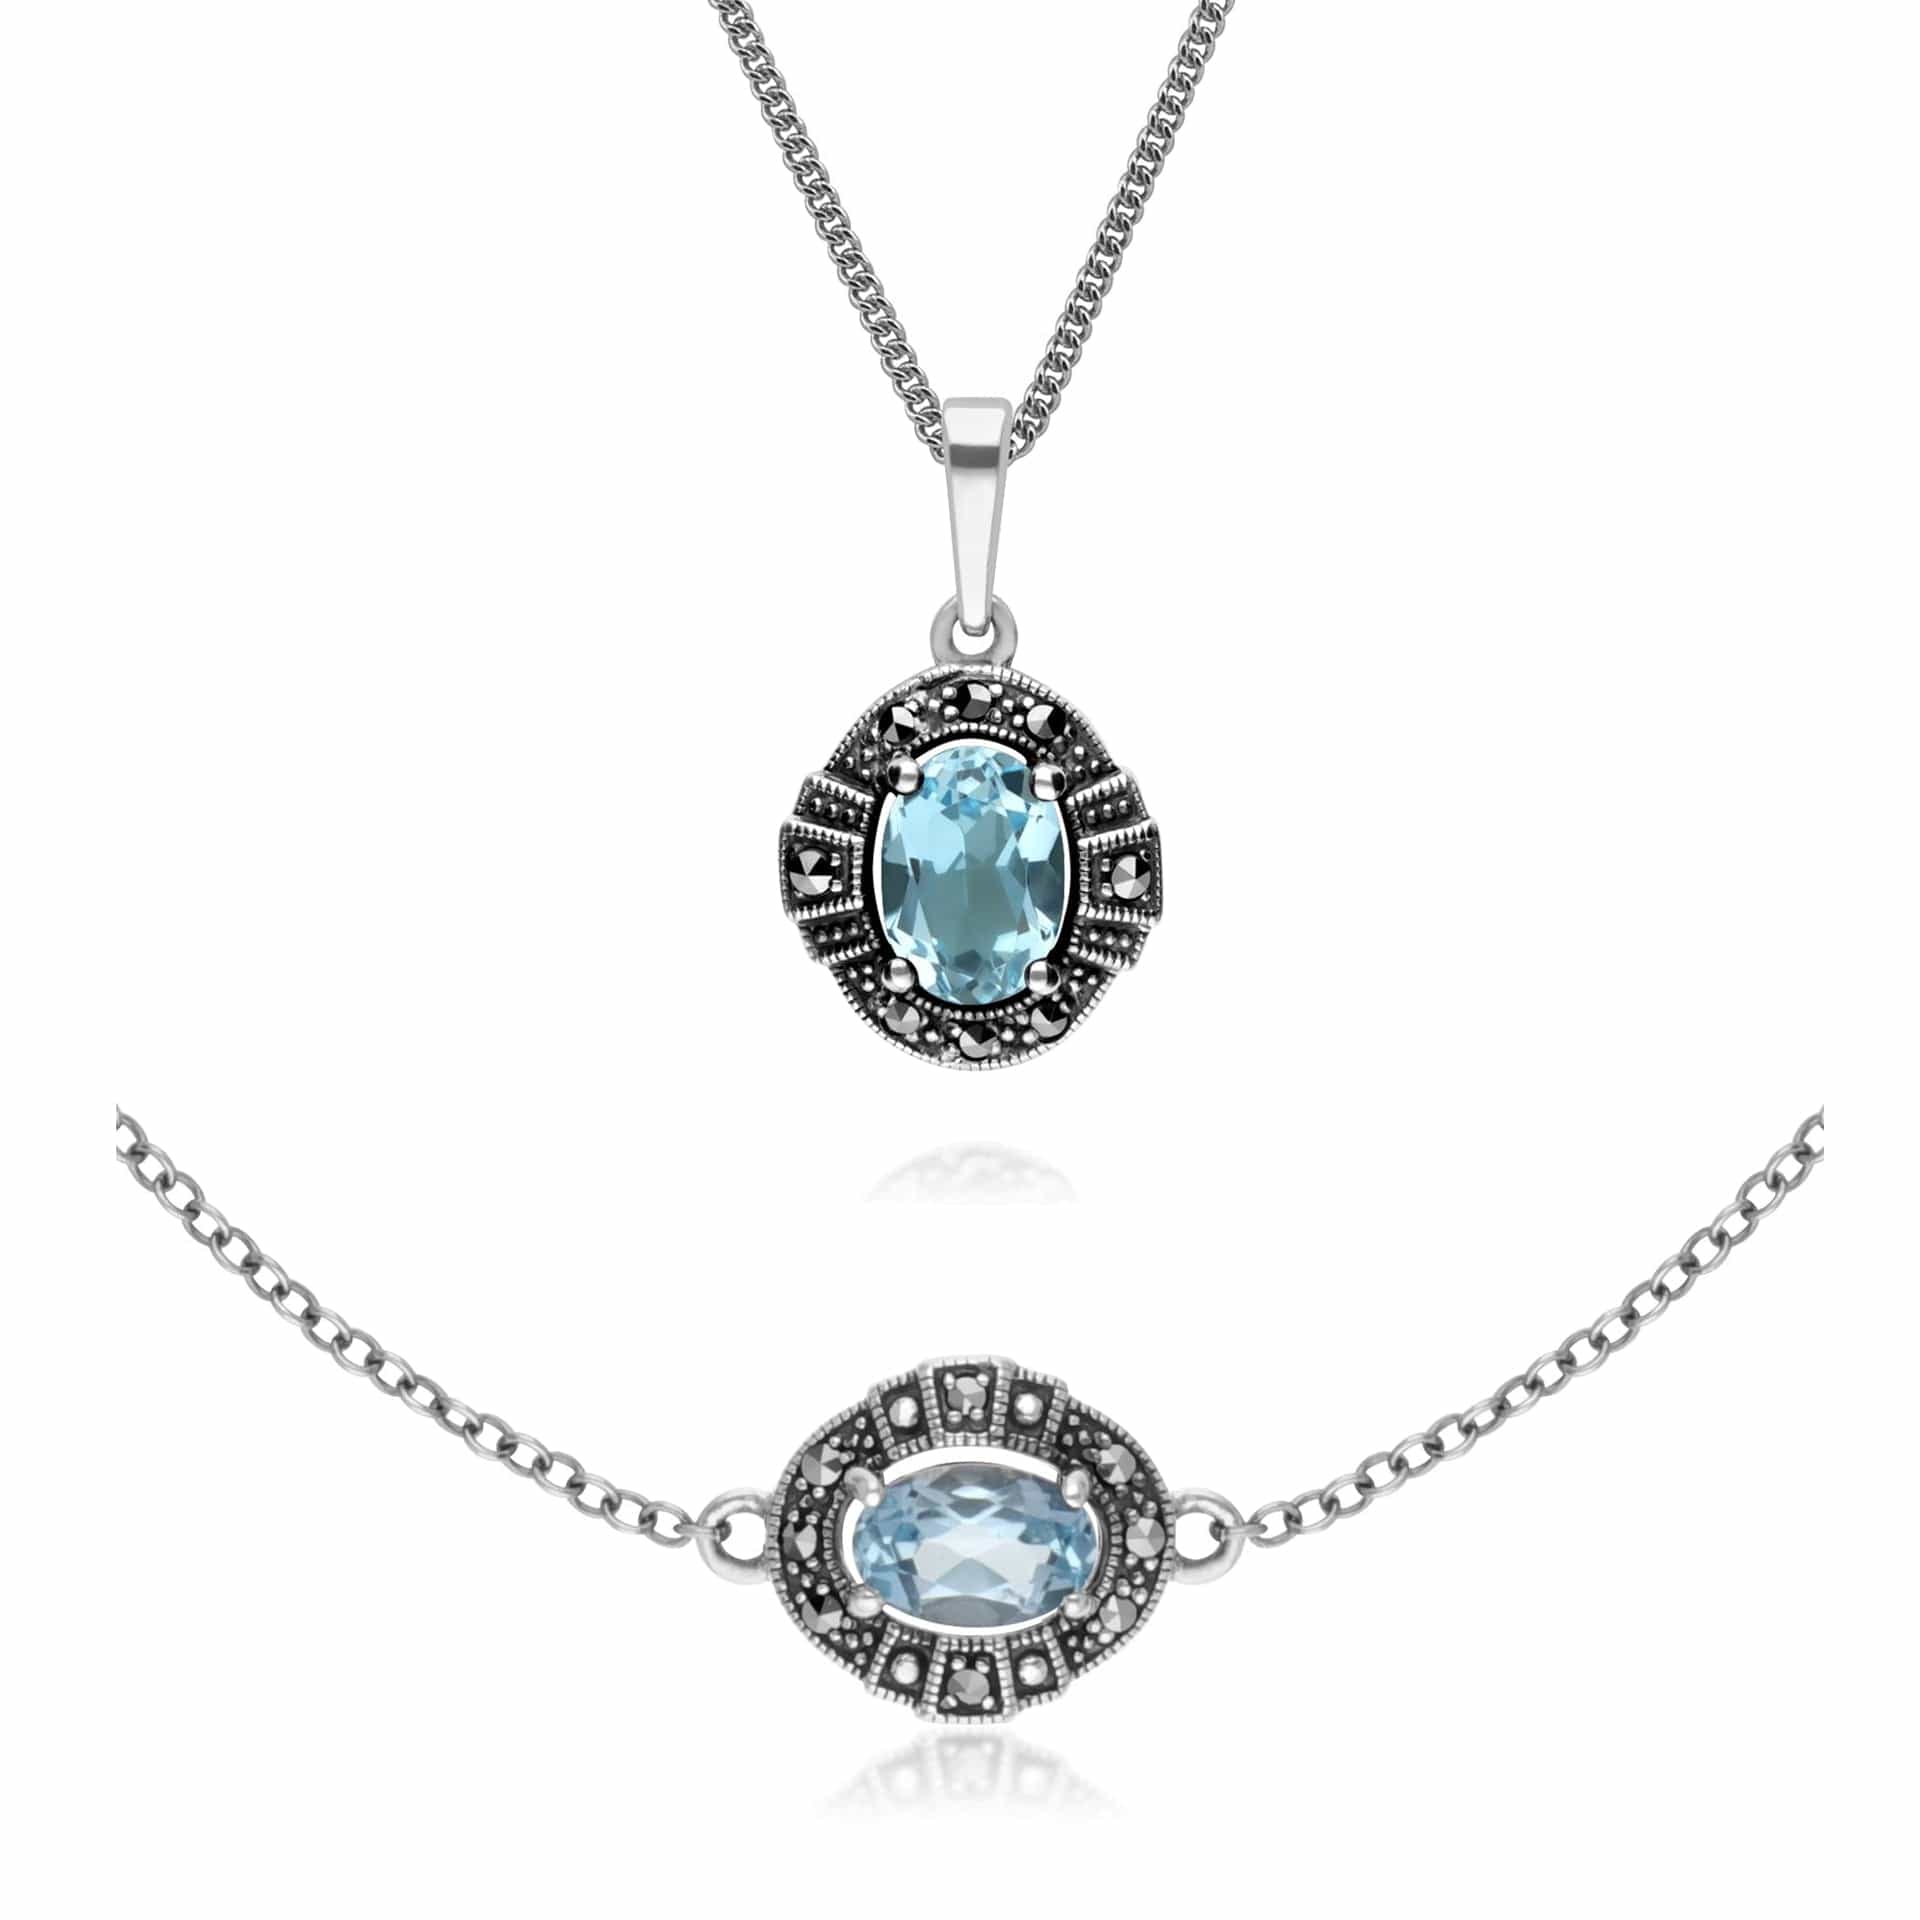 214P303301925-214L165401925 Art Deco Style Oval Blue Topaz and Marcasite Cluster Bracelet & Pendant Set in 925 Sterling Silver 1